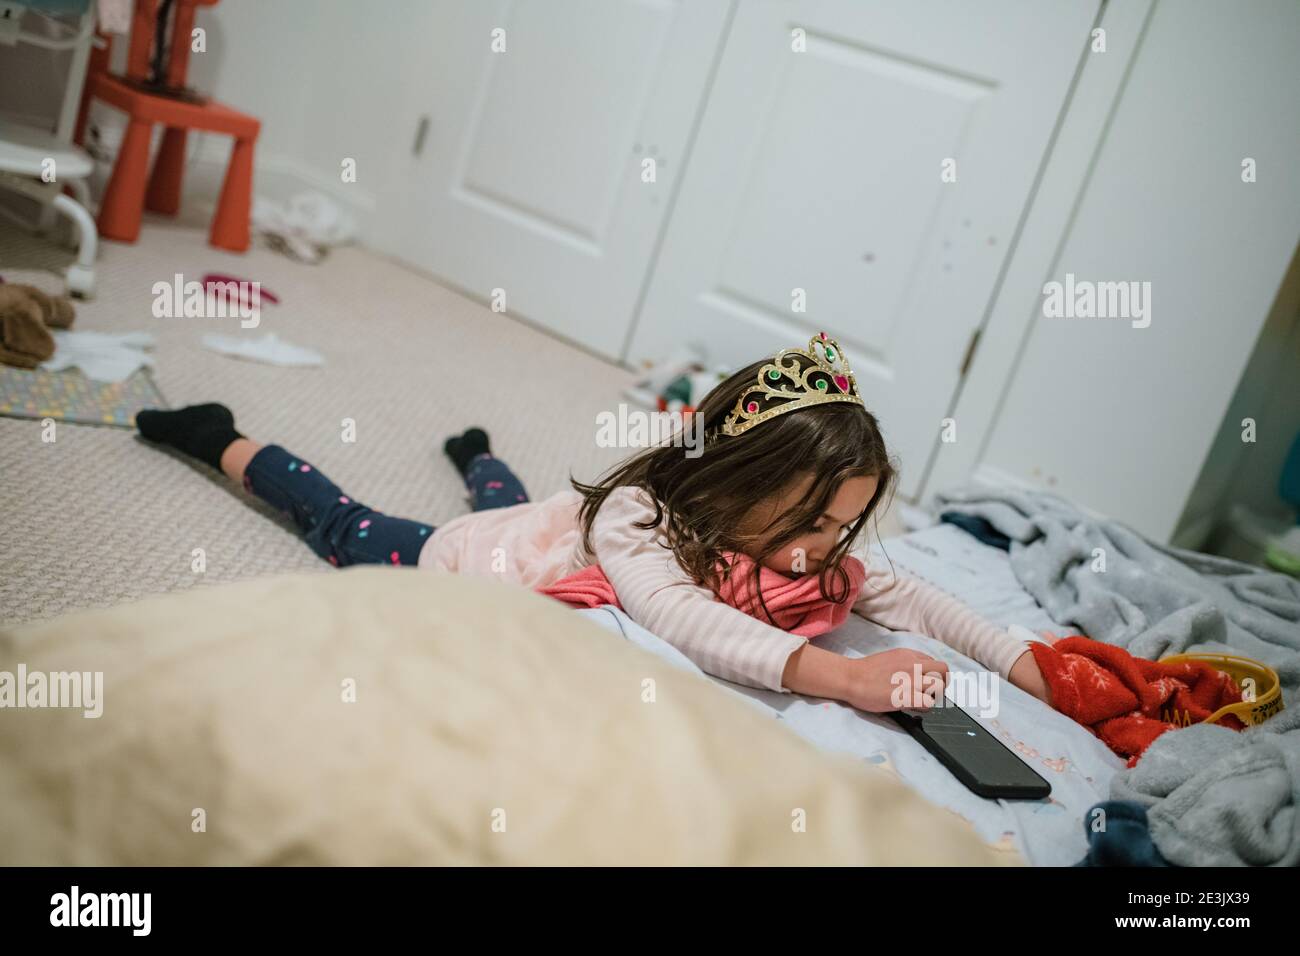 Young girl wearing tiara playing with smart phone laying down Stock Photo